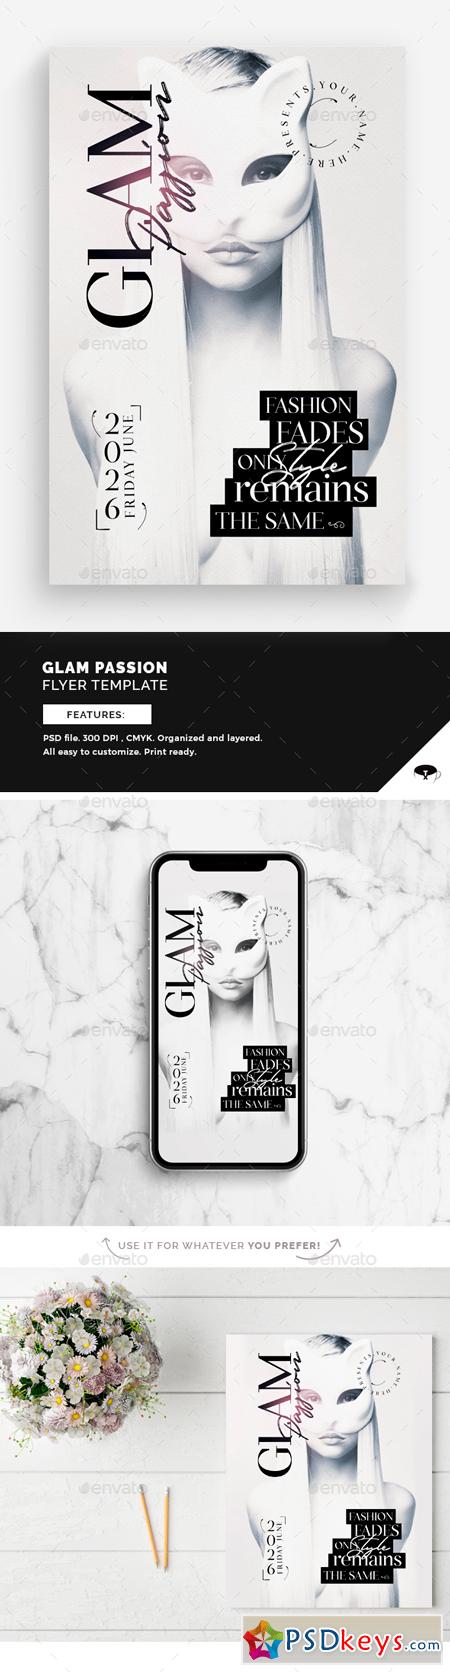 Glam Passion Flyer Template 22649869